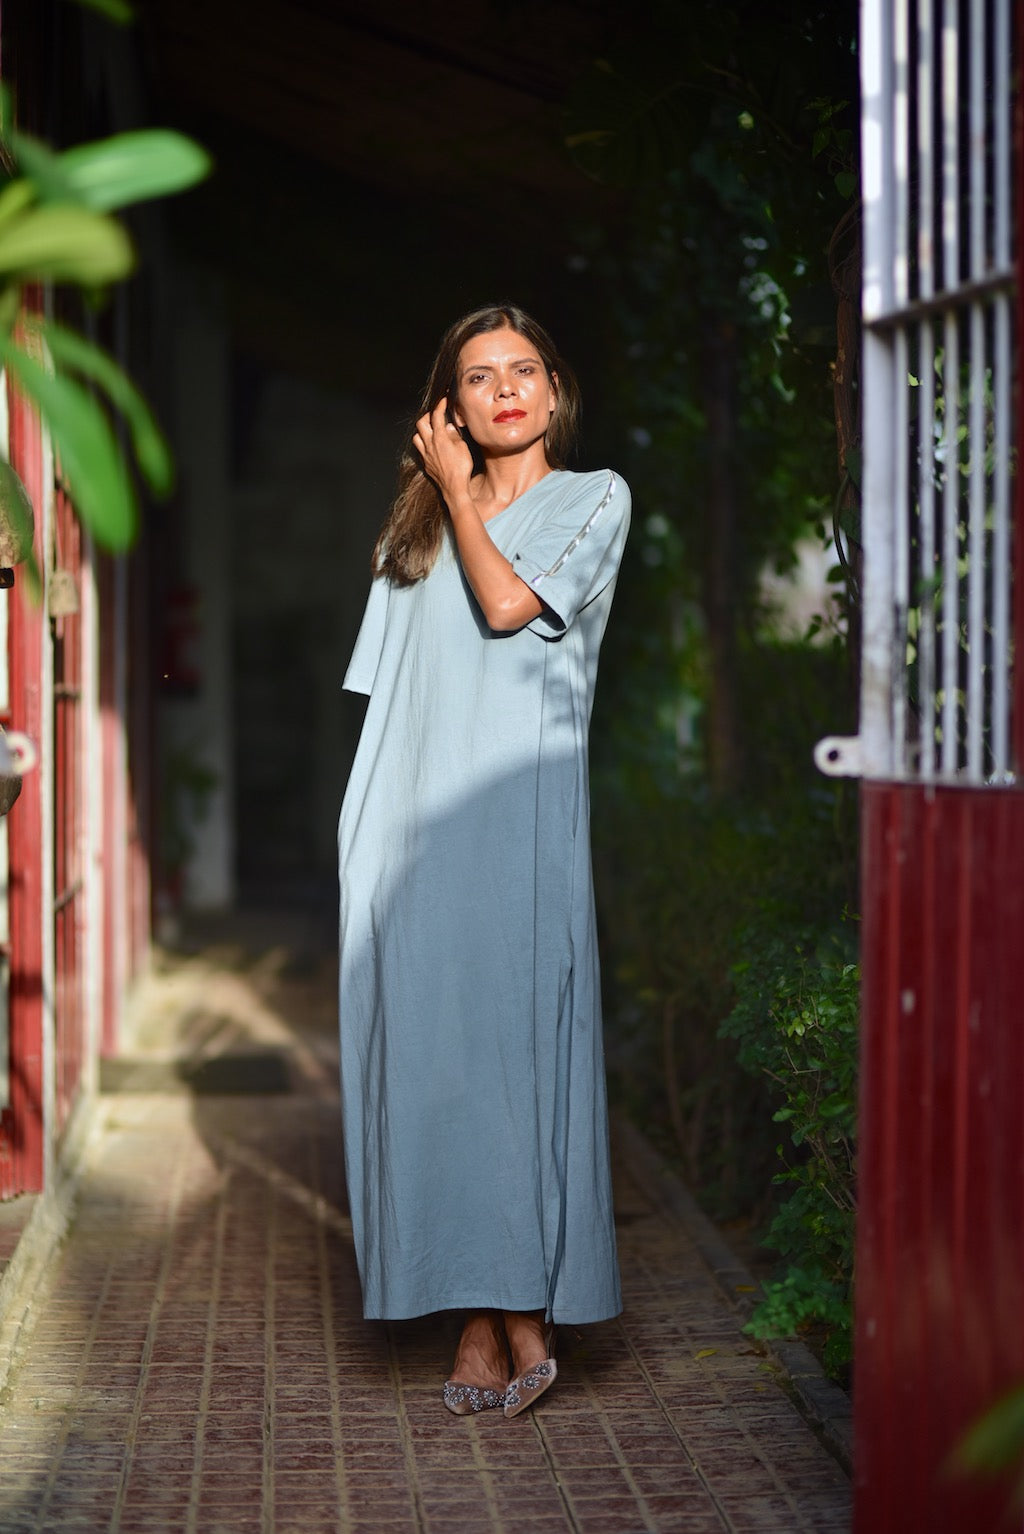 Sofia, Organic Cotton Jersey Maxi Dress in Dusty Blue, Embroidered at Shoulder - kinchecom